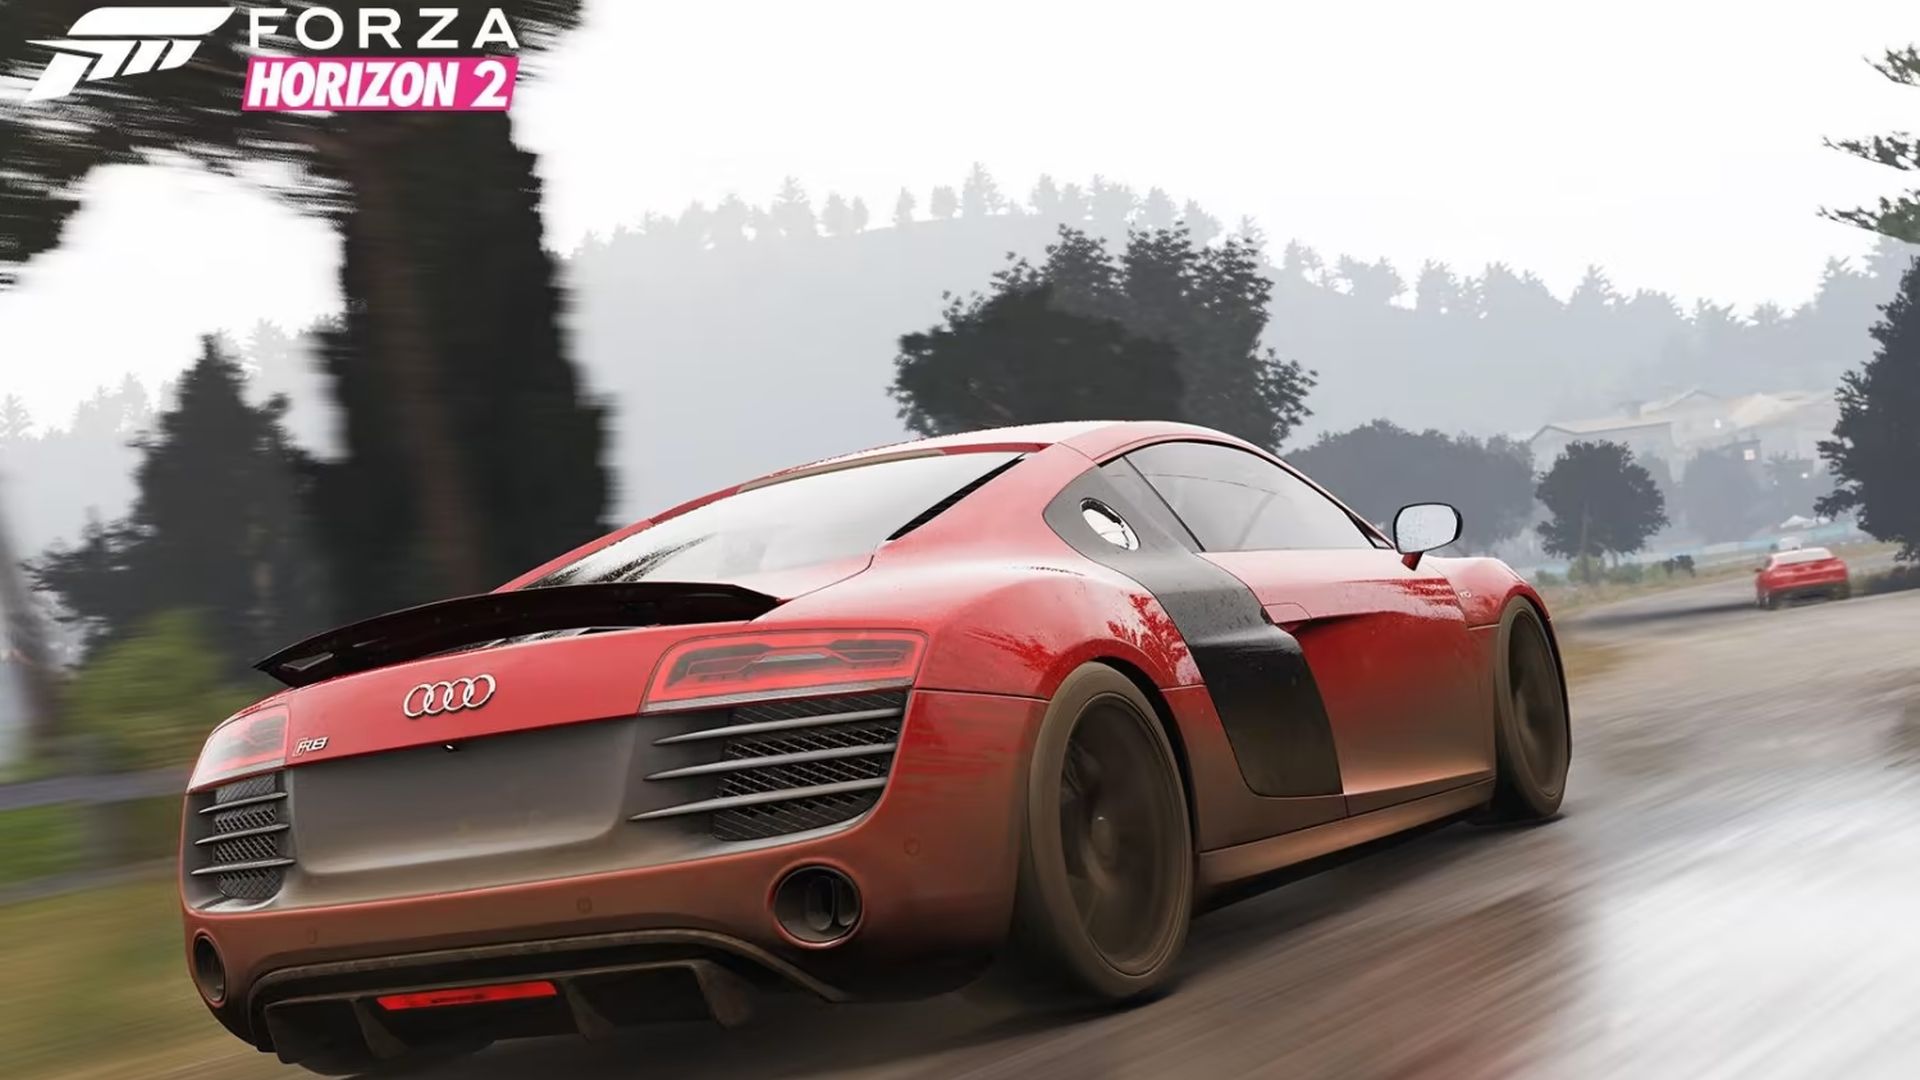 Forza Horizon 1 and 2's online services are shutting down in August